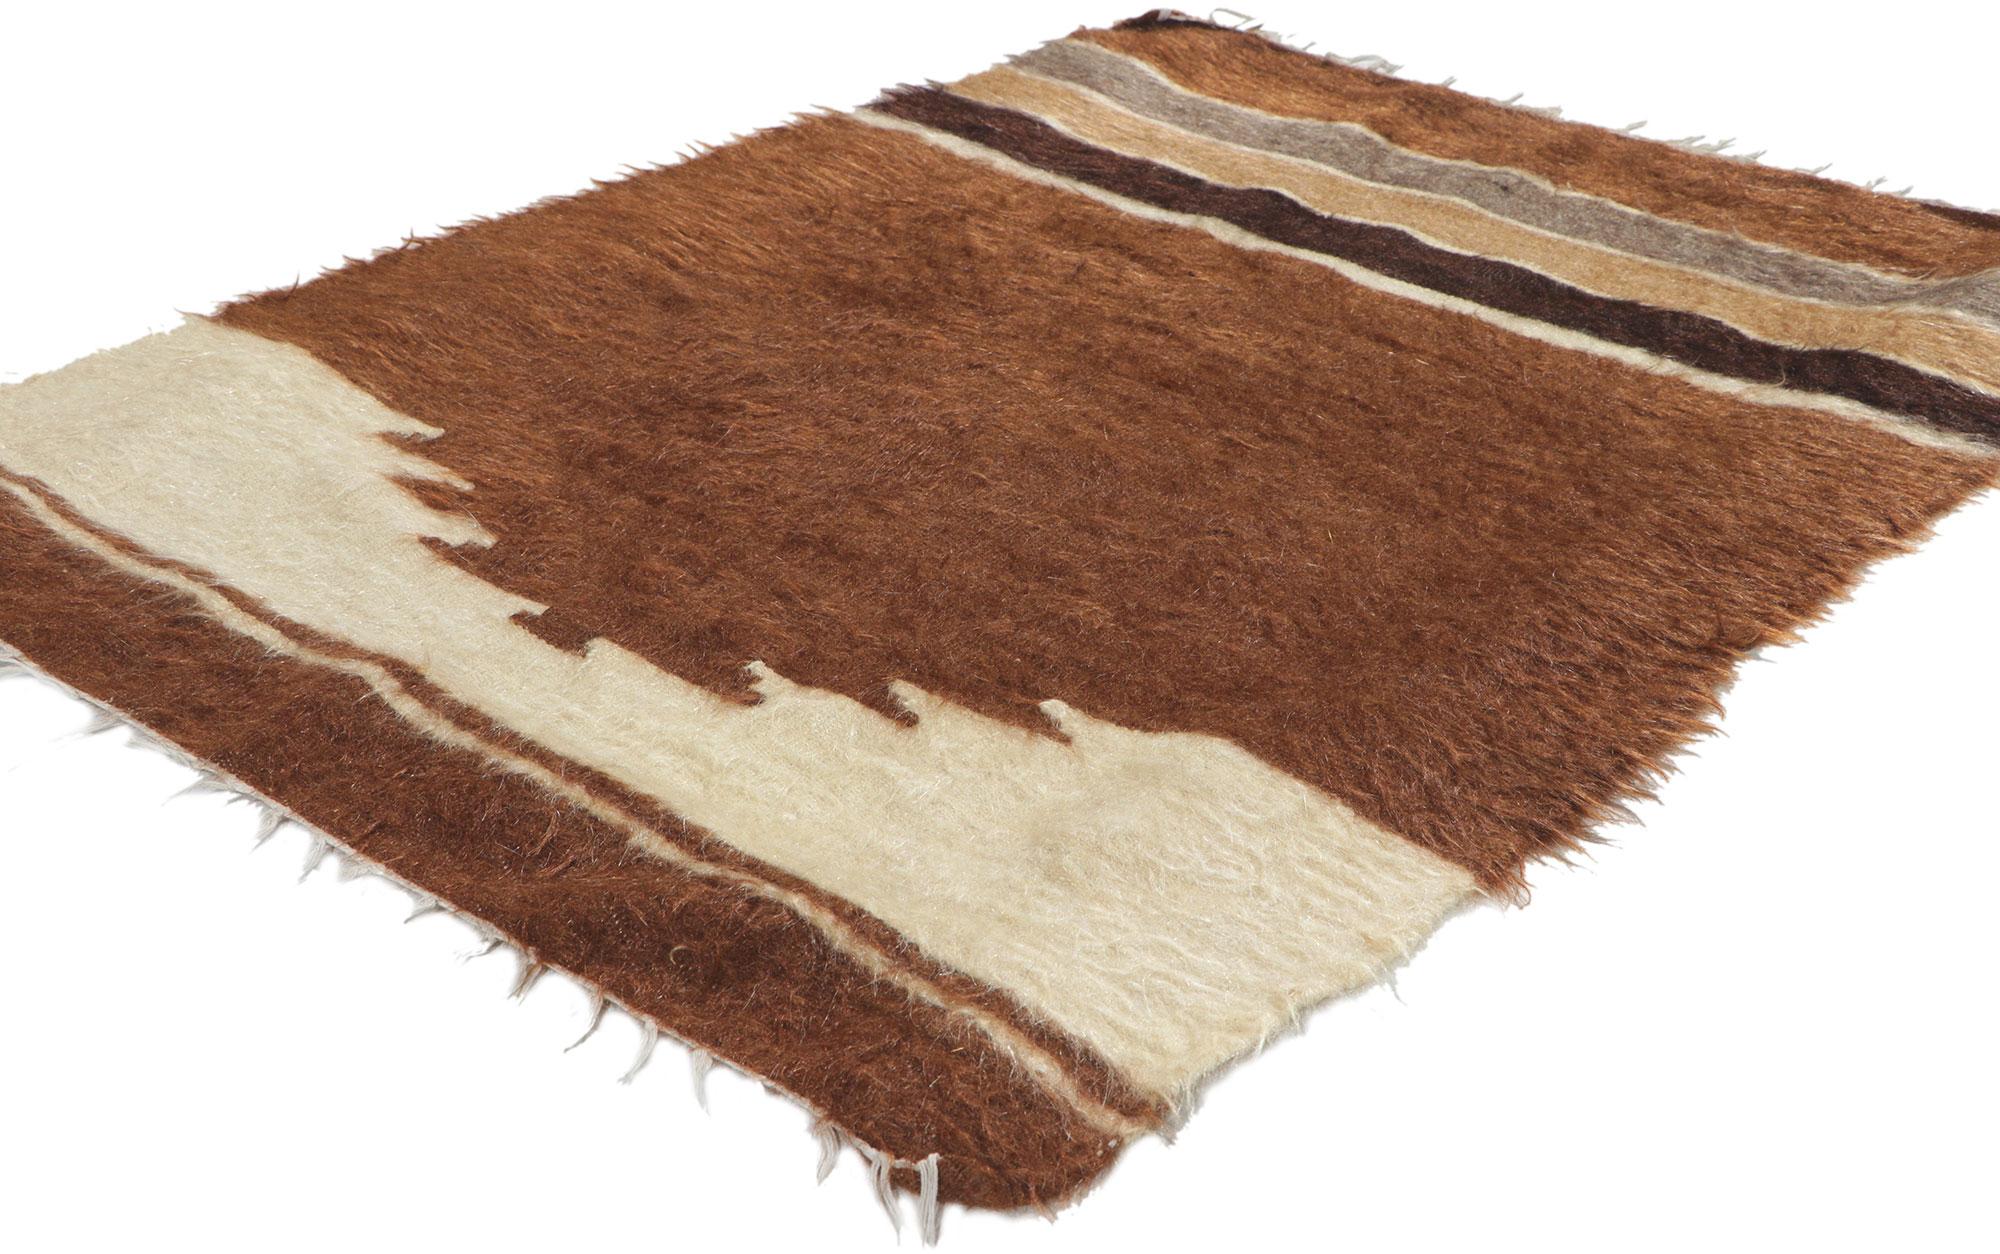 53850 Vintage Turkish Angora Wool Blanket Kilim rug, 02'09 x 03'09?. With its shaggy pile, incredible detail and texture, this handwoven Turkish angora kilim rug is a captivating vision of woven beauty. The eye-catching geometric design and earthy